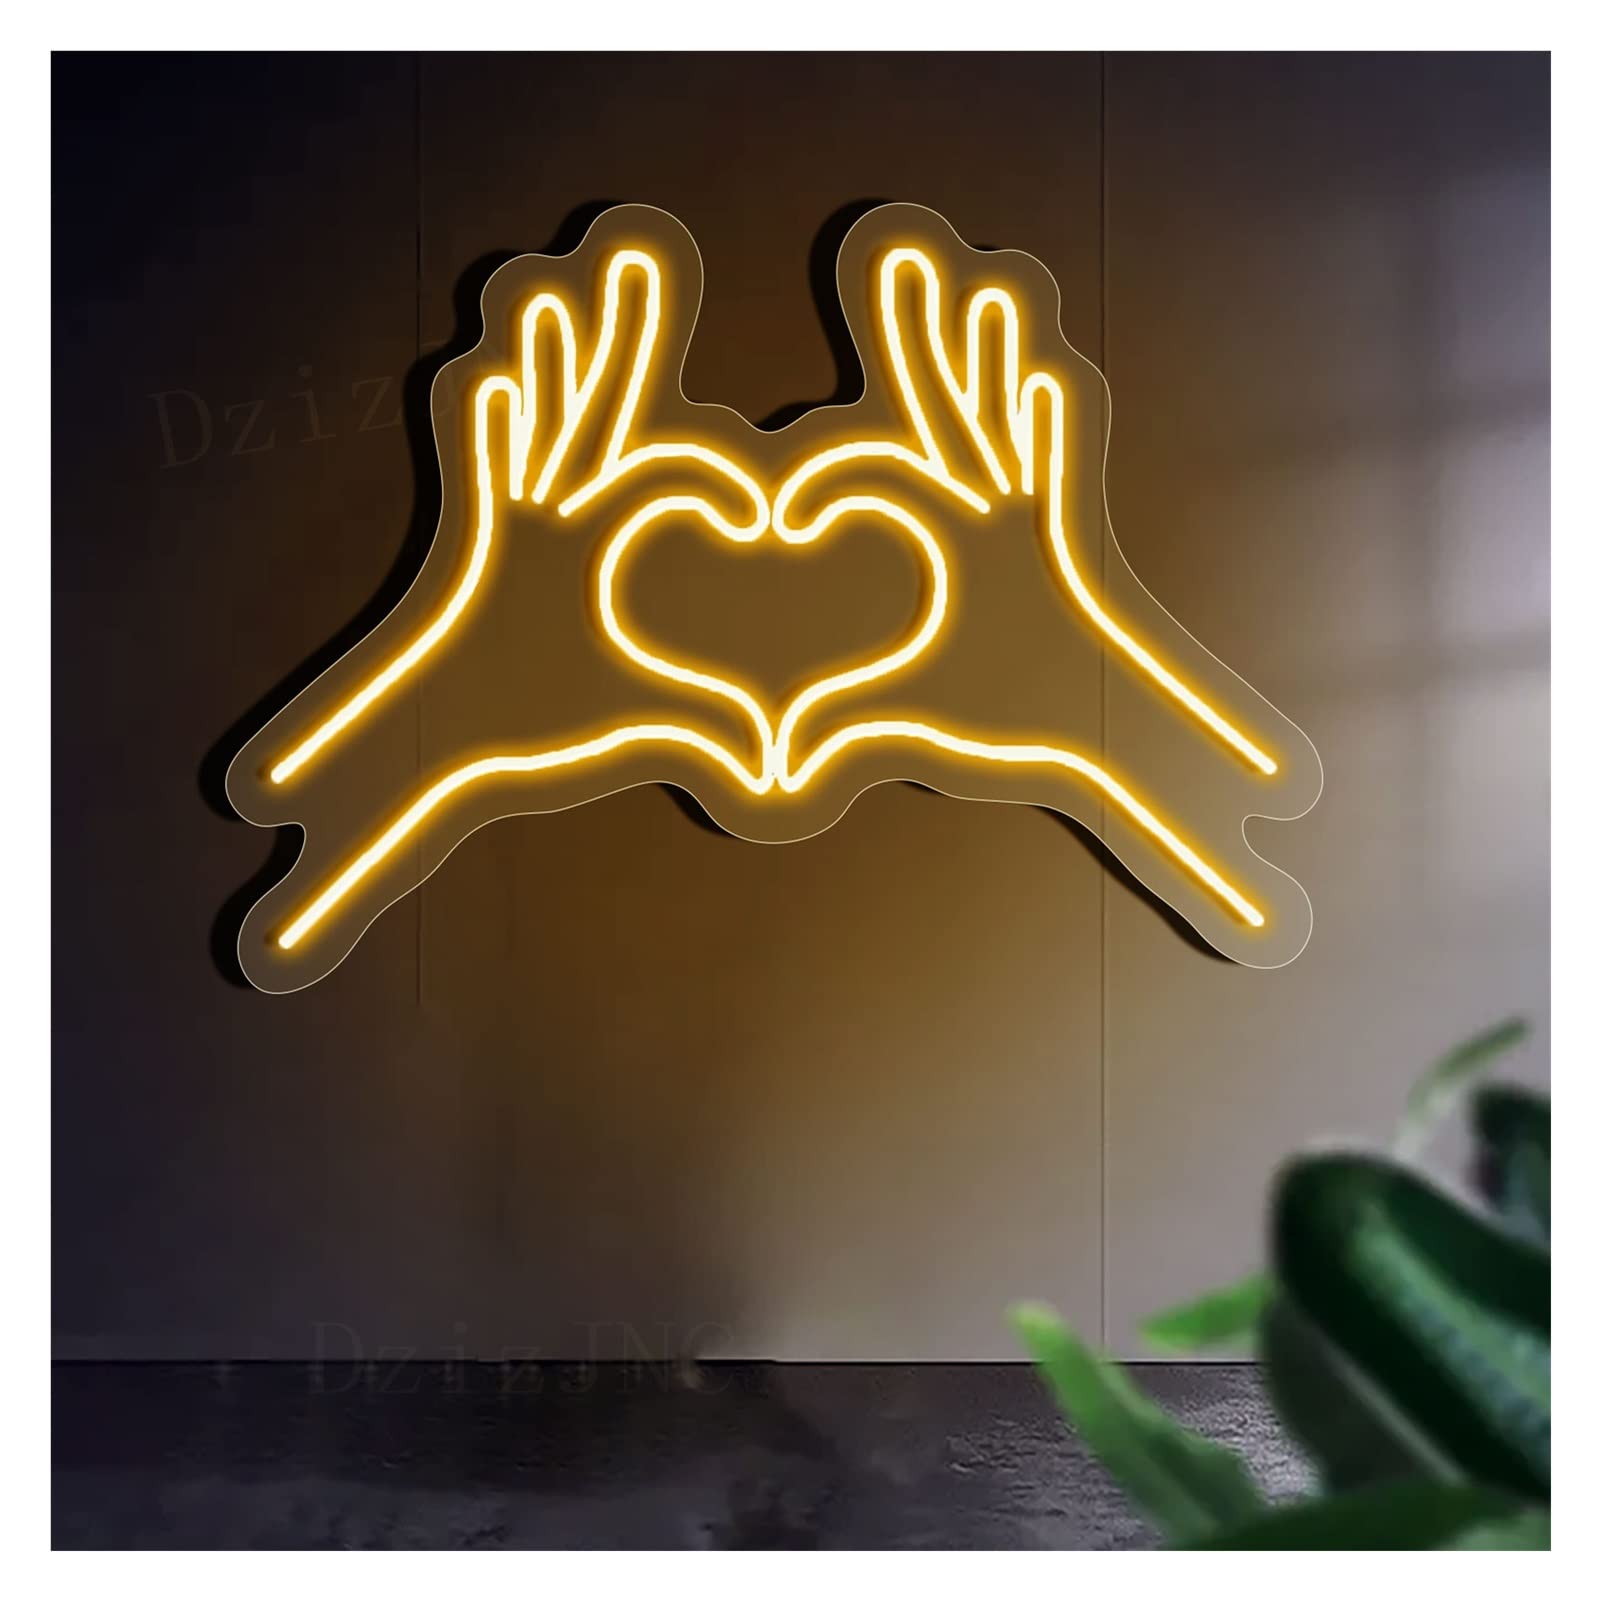 DzizJNC 'Heart Hand' Neon Signs Lights, Custom Led Acrylic Neon Sign for Home Room Shop Wall Art Decoration (Color : Yellow, Size : 41x31cm(16x12in)) : Tools & Home Improvement